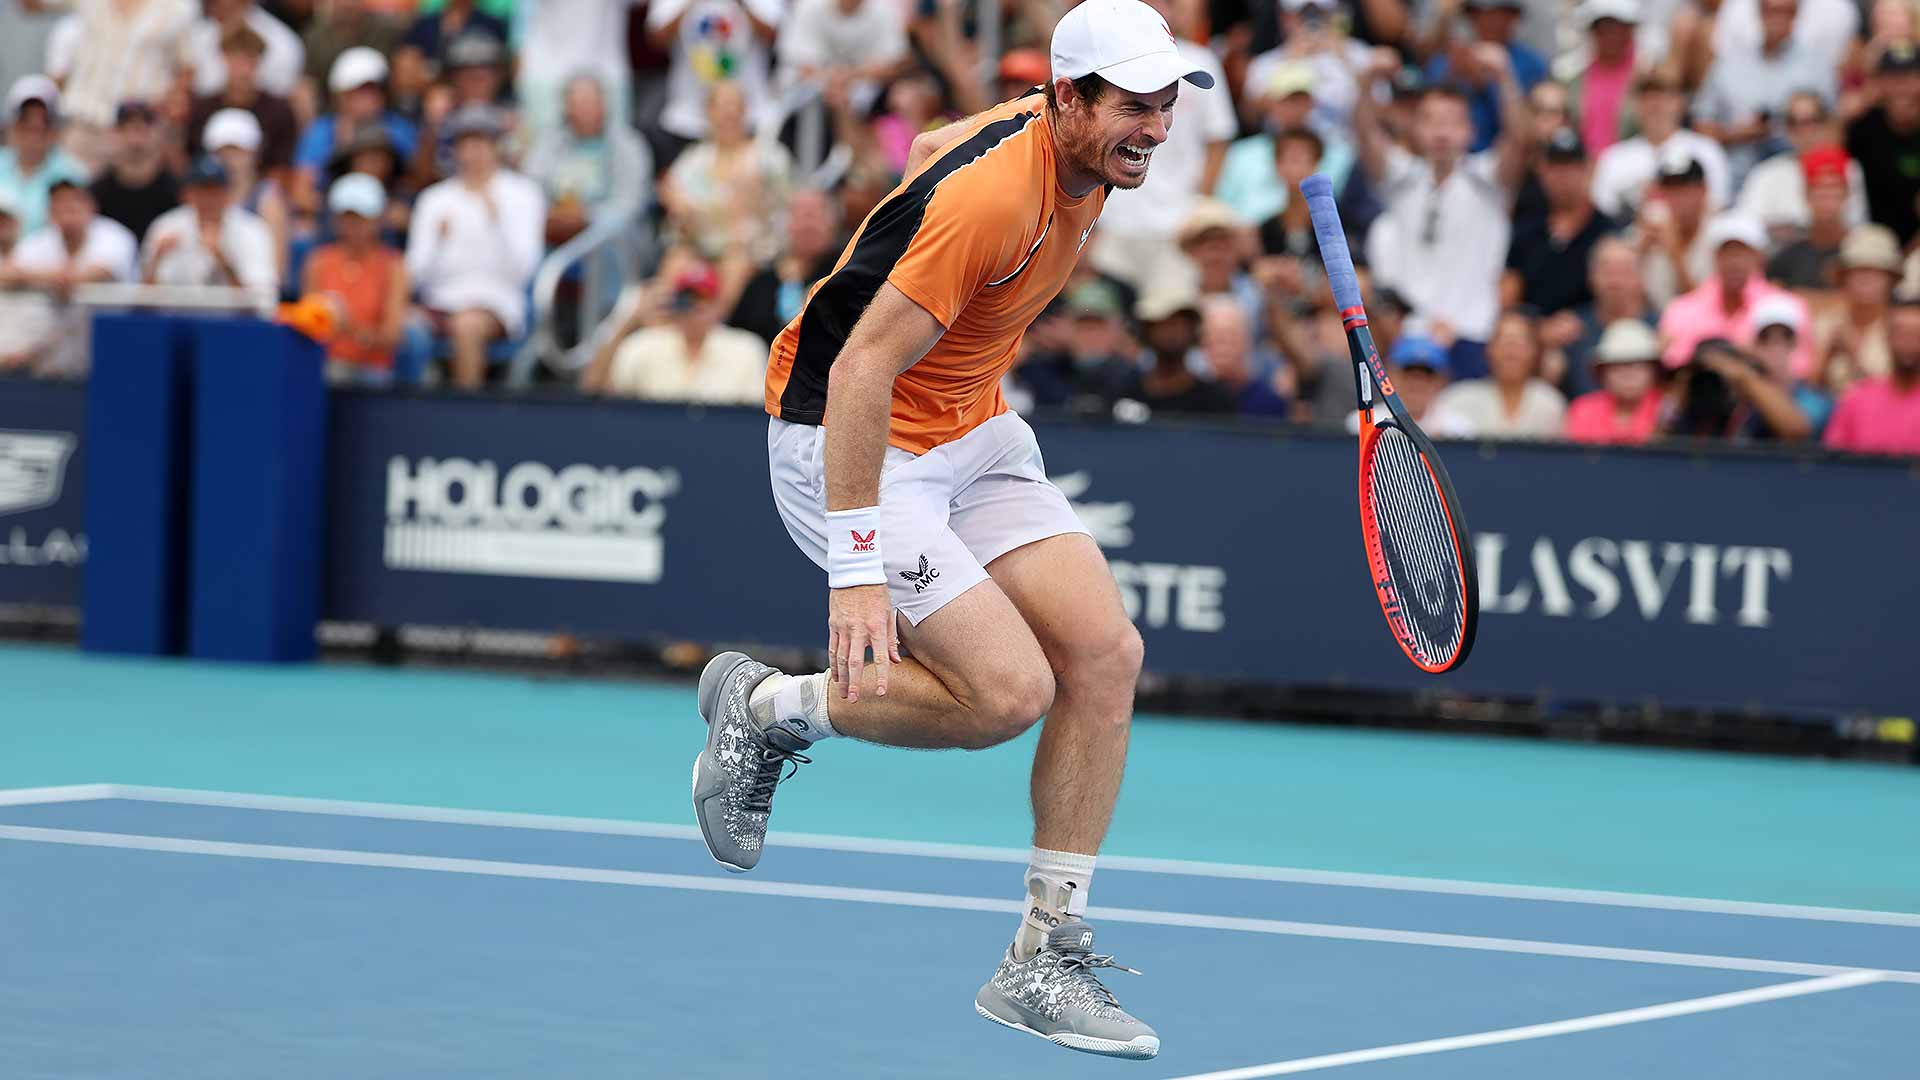 Andy Murray injured his ankle late into his third-round match in Miami against Tomas Machac.